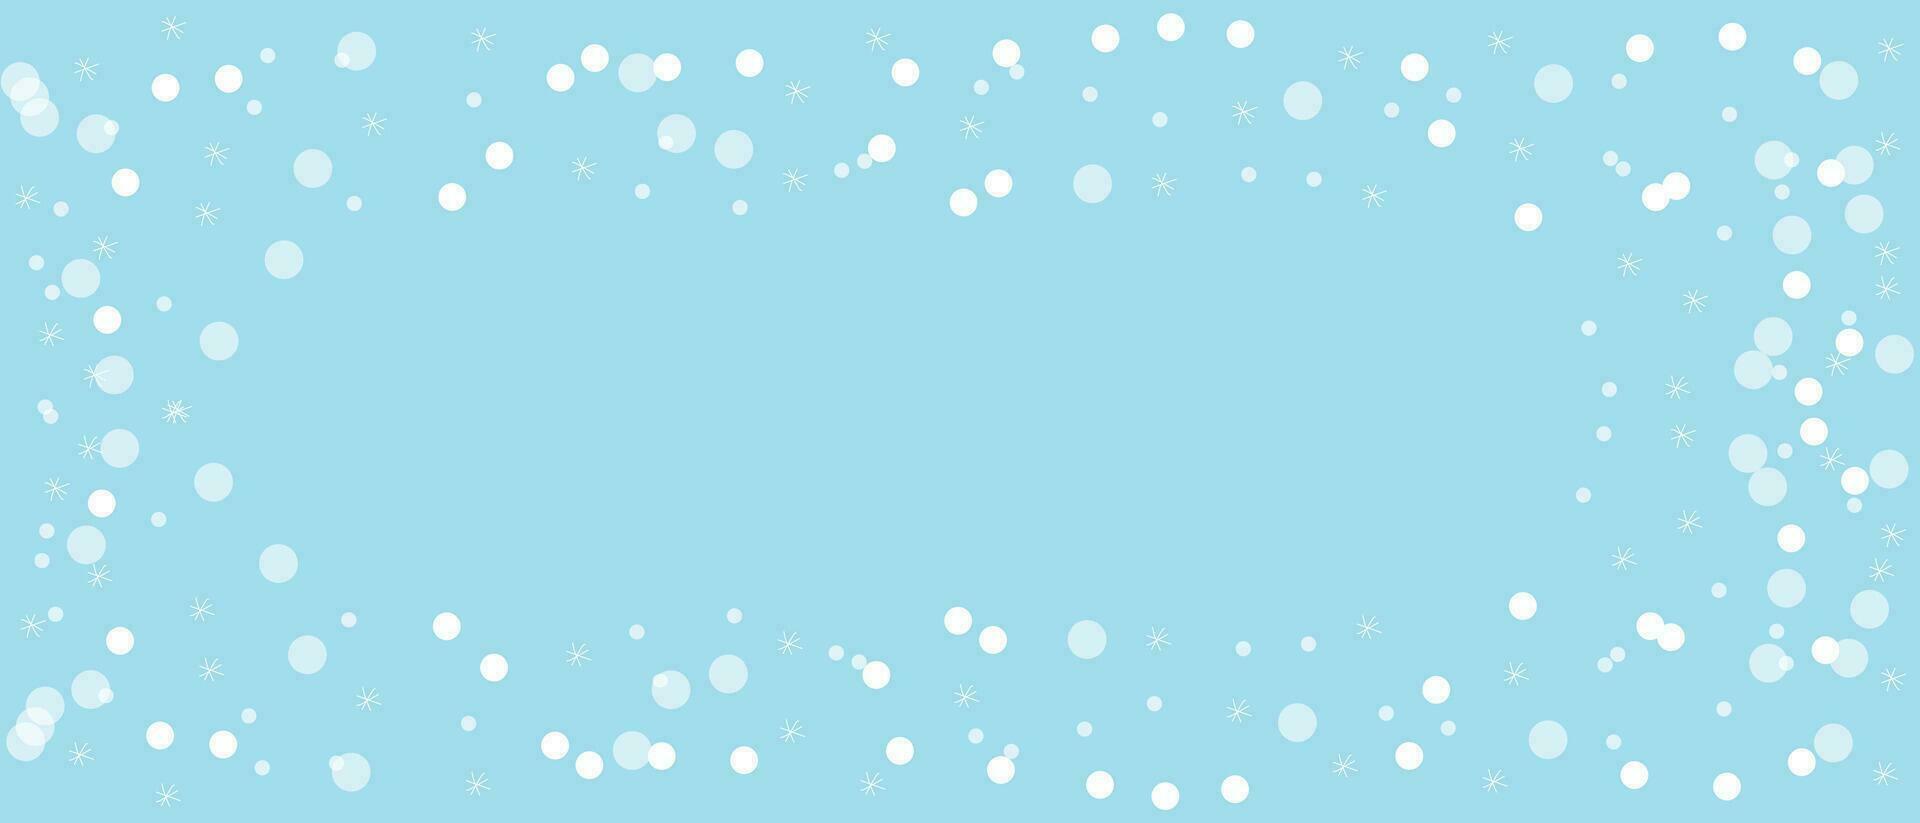 Winter background. Snowflakes on a blue background. vector